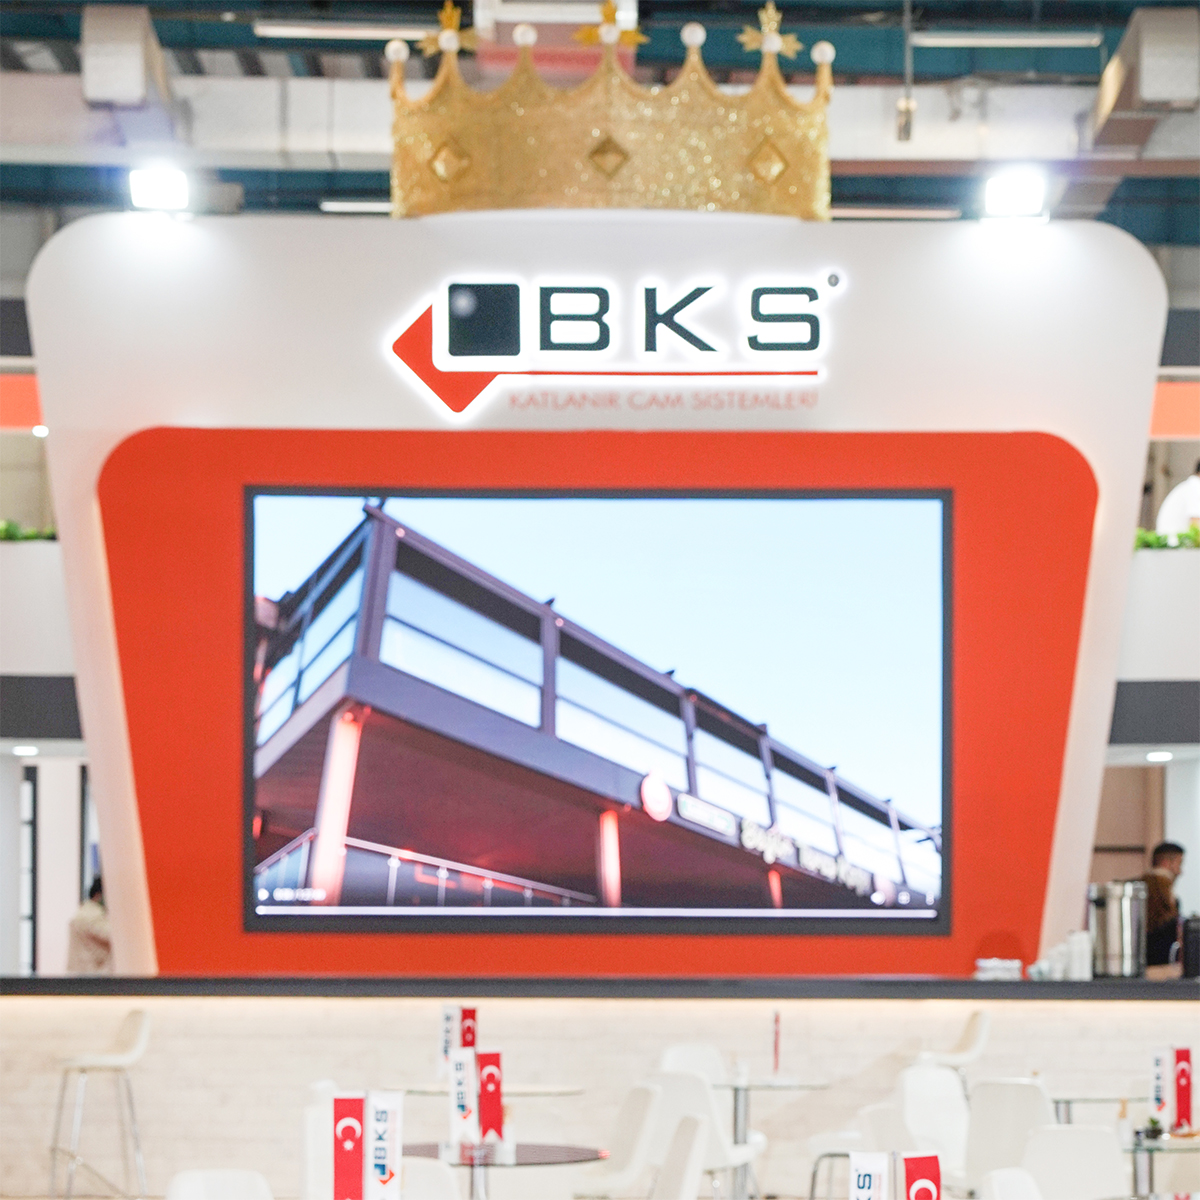 BKS Sales Technical Support